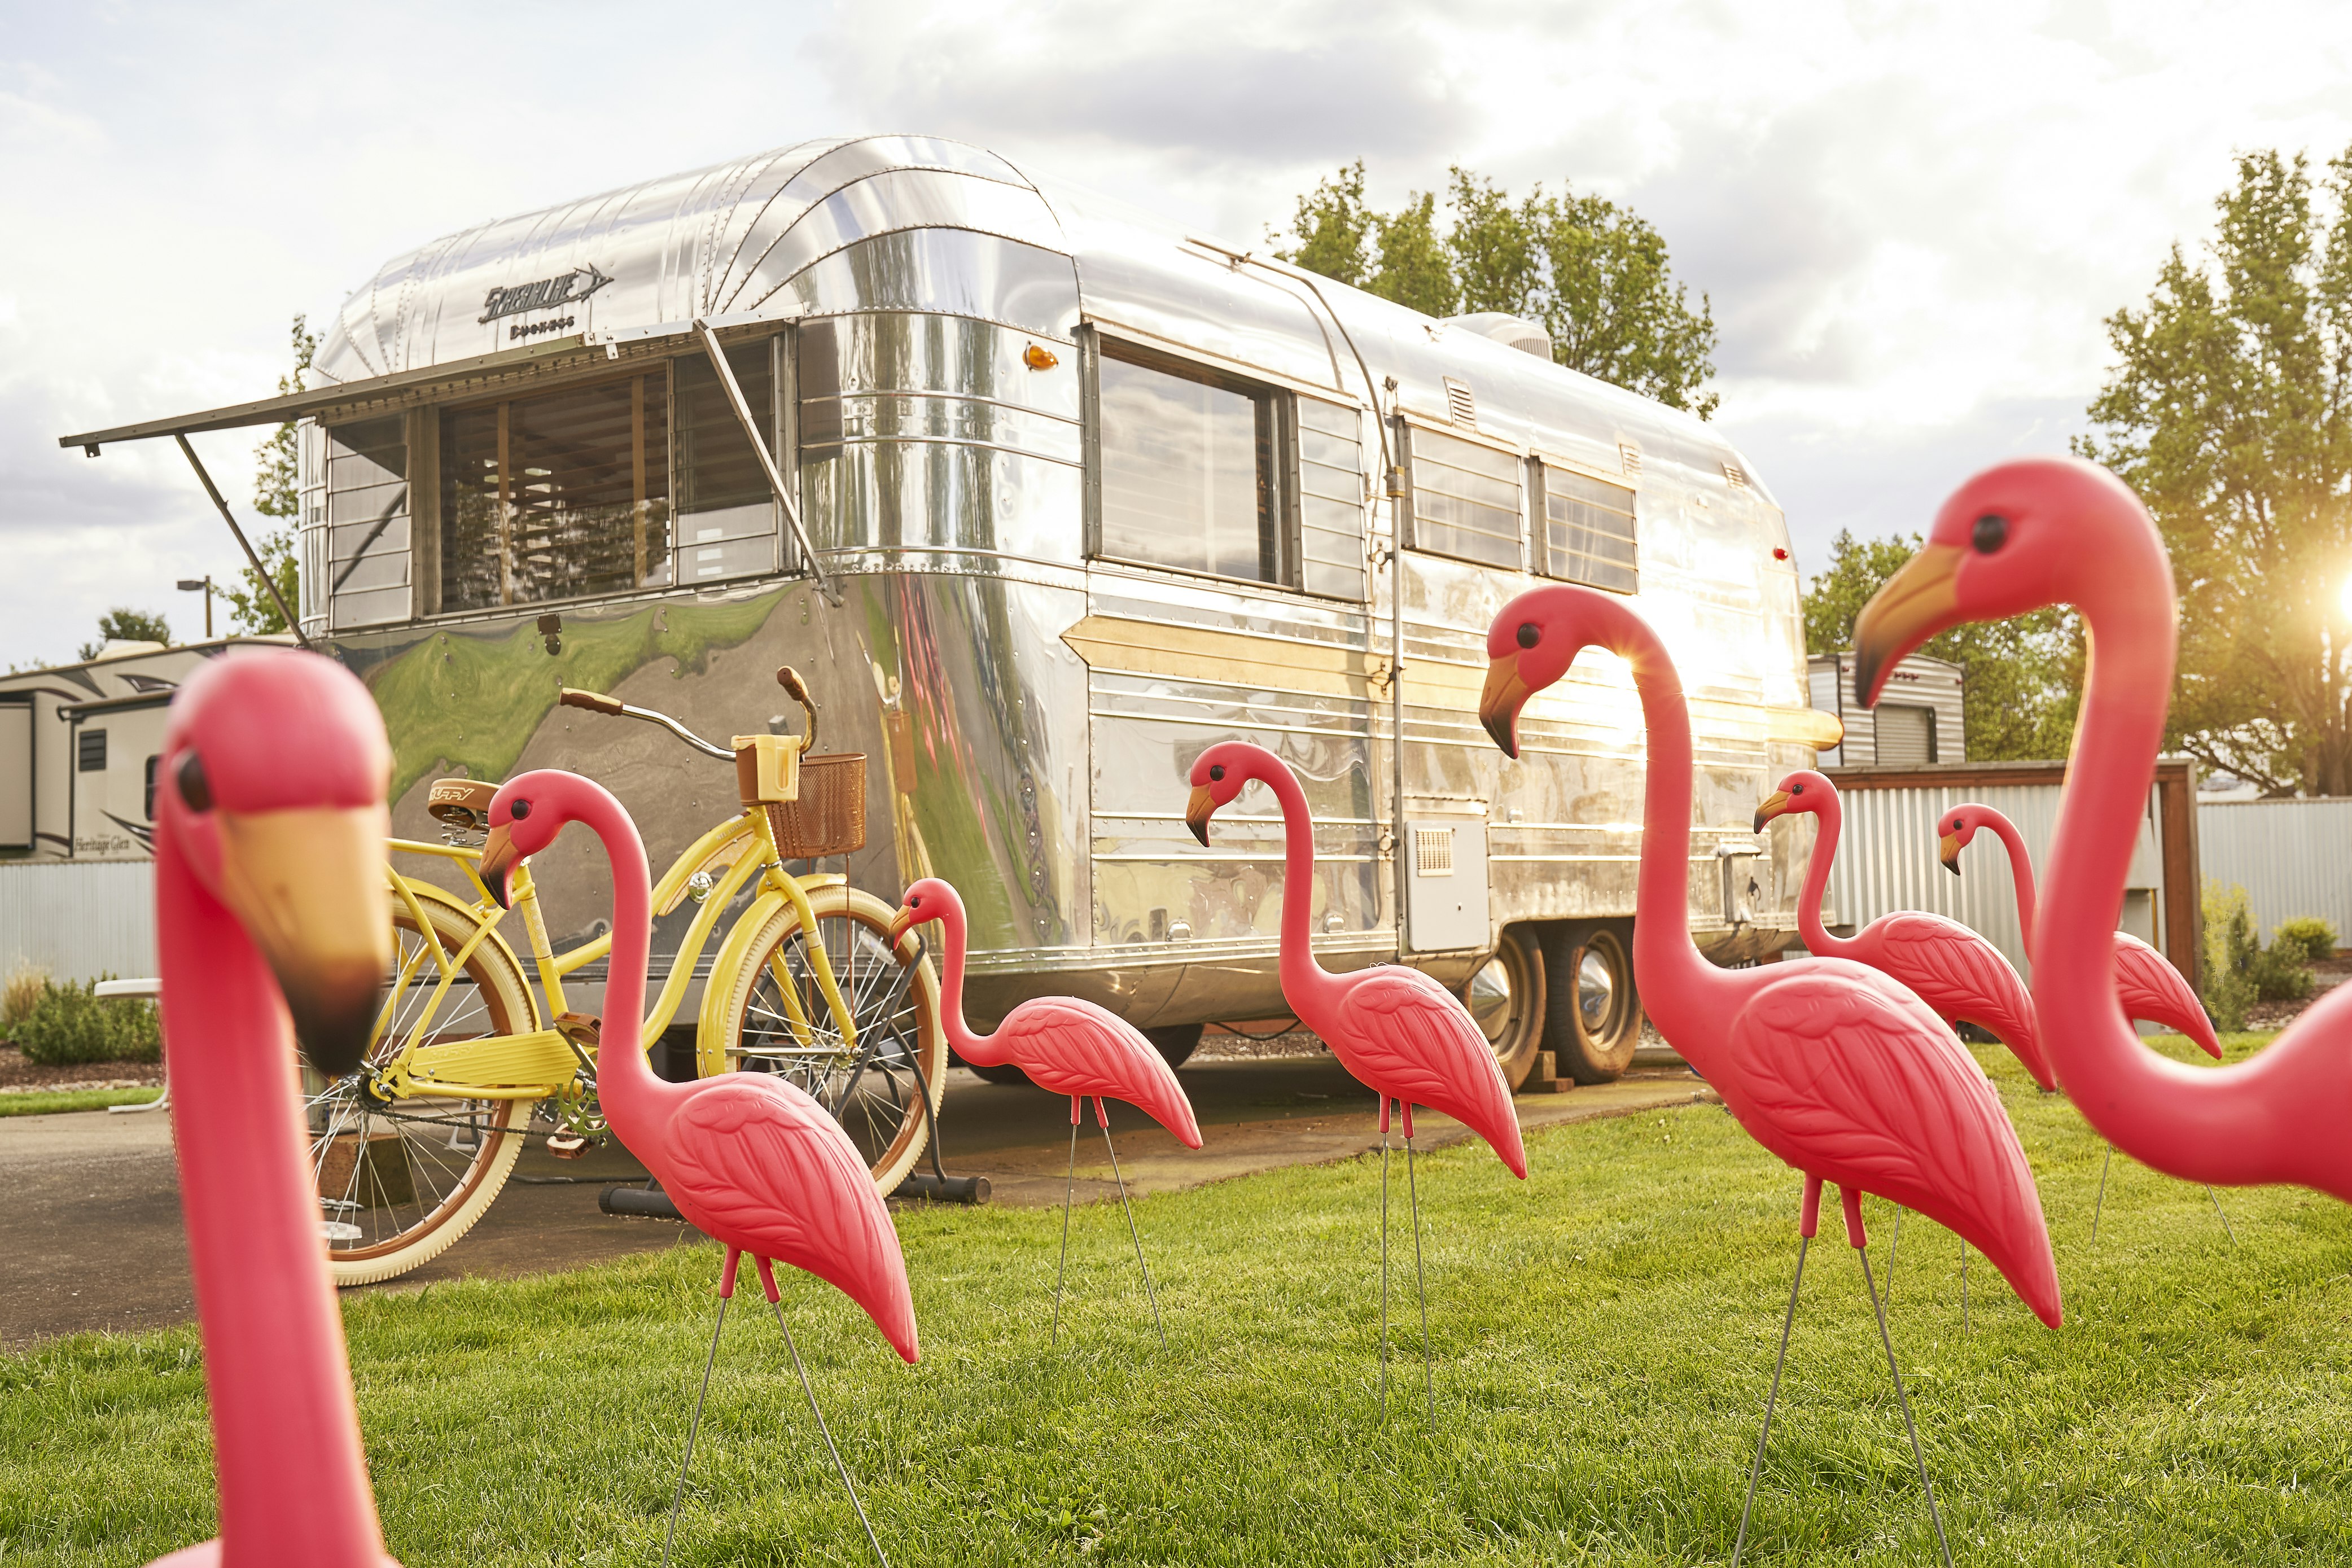 A silver vintage camping trailer with a metal awning tipped up to show a window on the end sits on a paved drive by a neatly clipped green lawn. The lawn is covered in eight pink plastic flamingo lawn ornaments, one of which is comically facing the viewer. A yellow beach cruiser bicycle sits by the trailer. The sun peaks through the trees in the background.